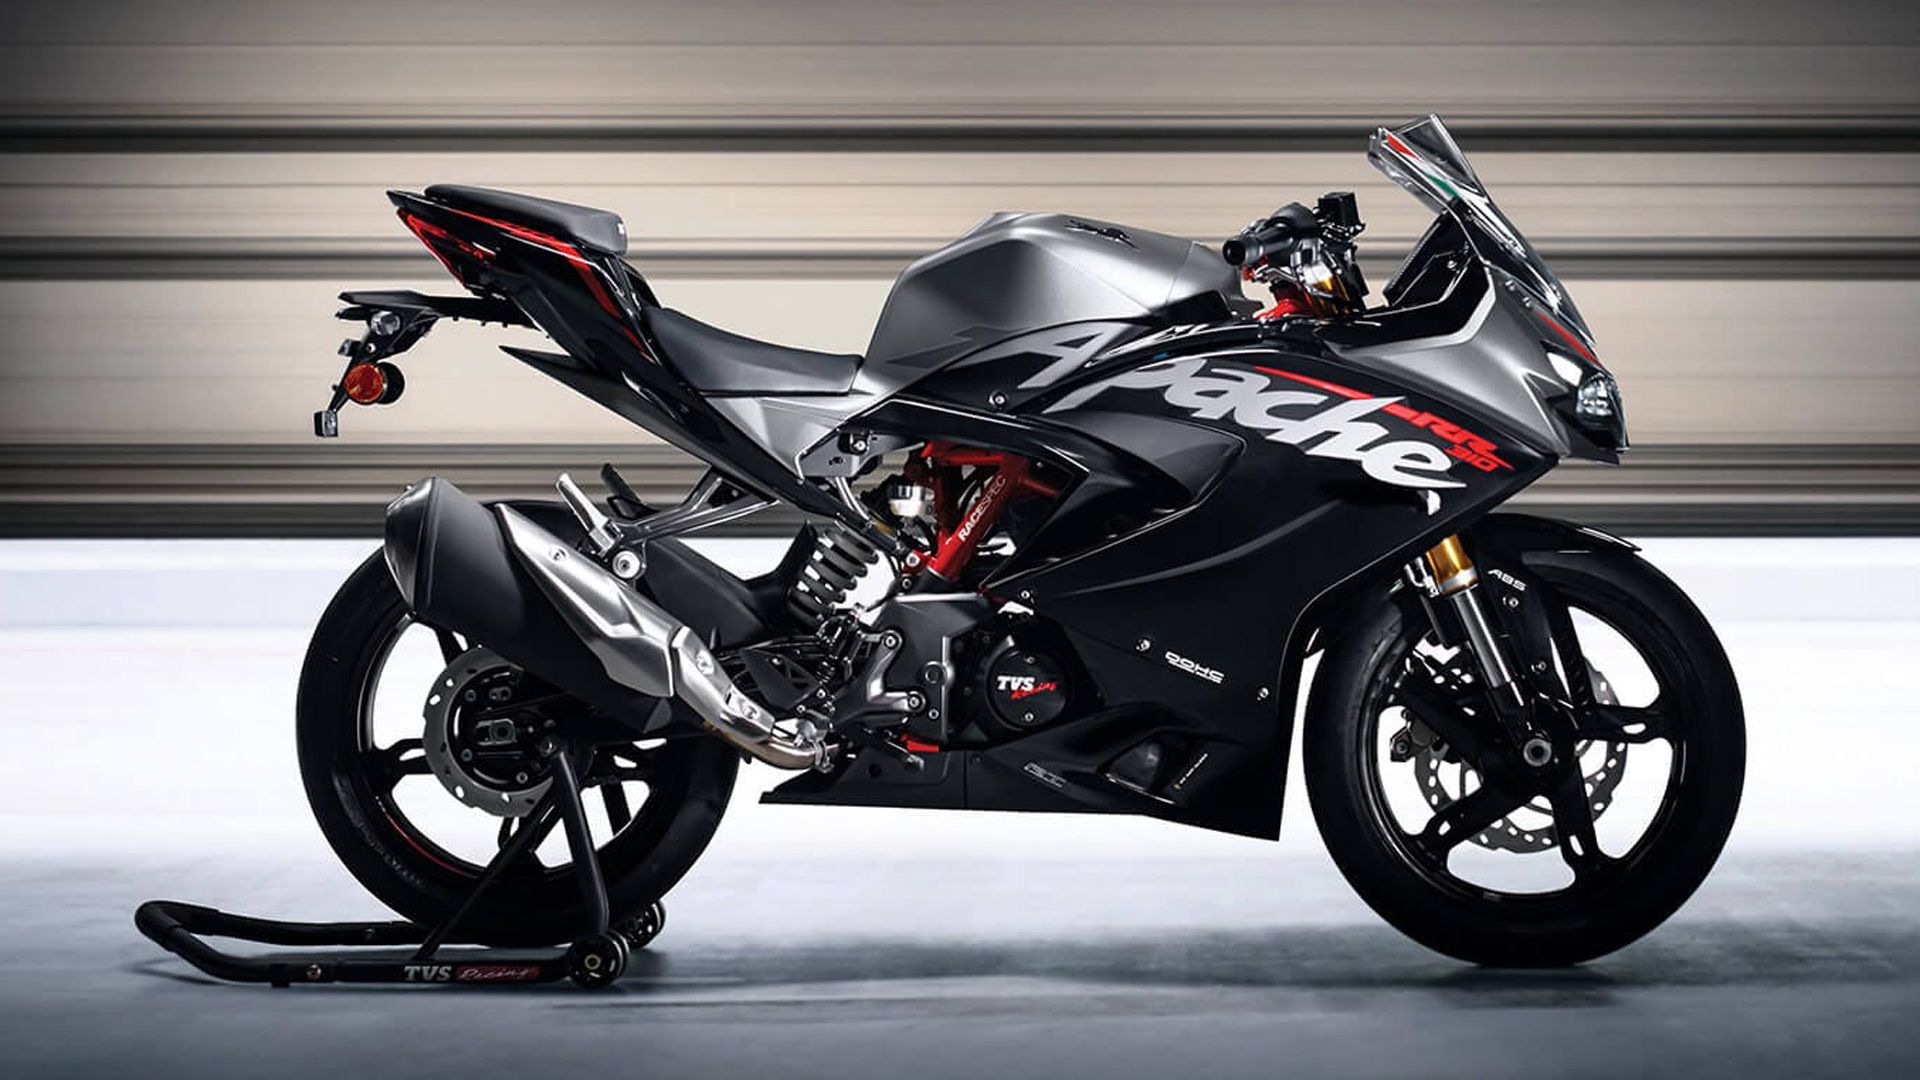 2023 TVS Apache RR 310 fully faired sports-tourer motorcycle